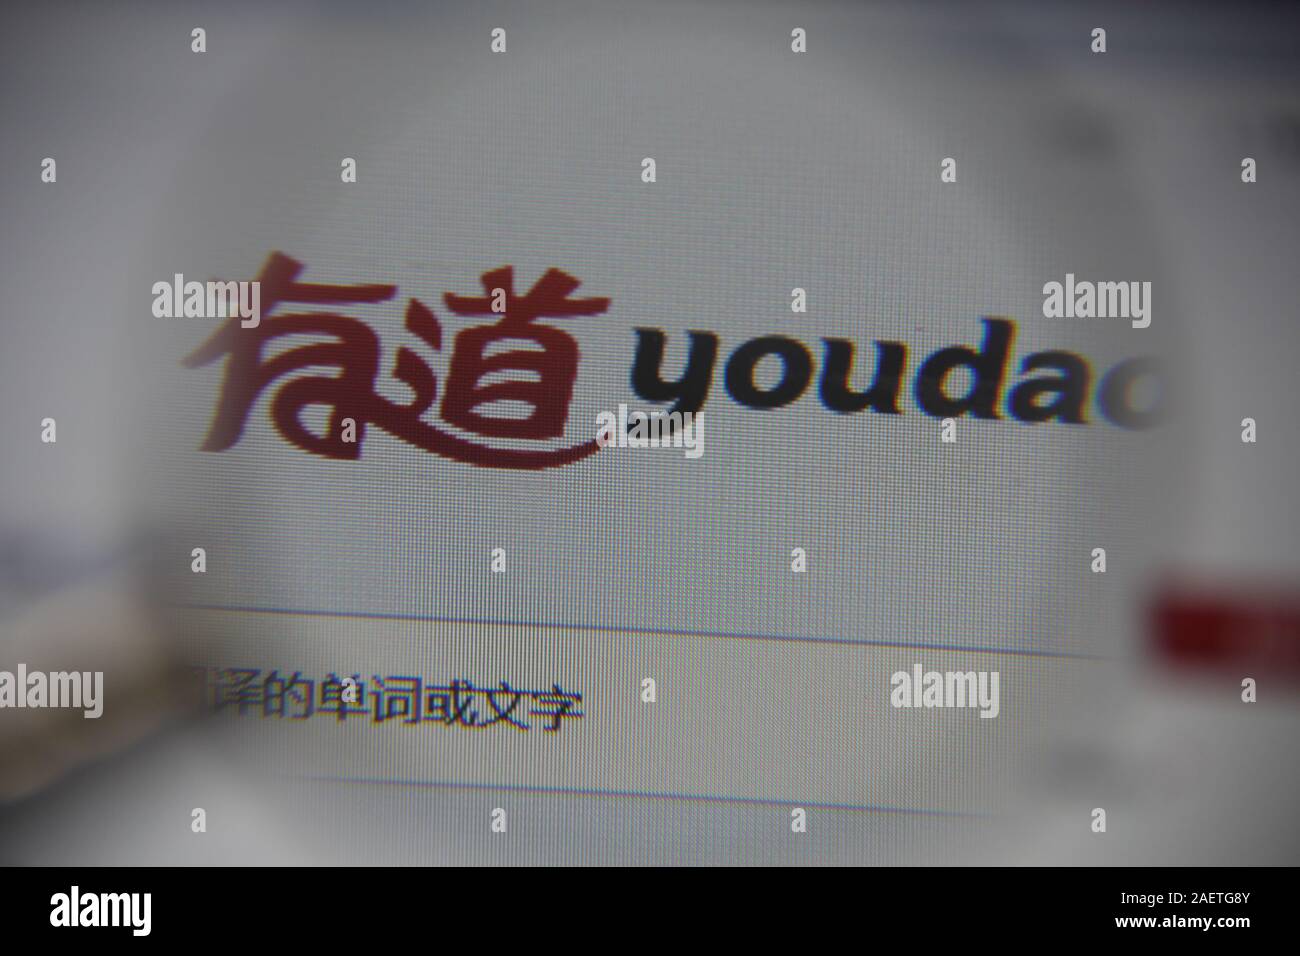 --FILE--In this unlocated photo, the symbol of Youdao, online education arm of NetEase, on its online dictionary website is shown, 29 September 2019. Stock Photo